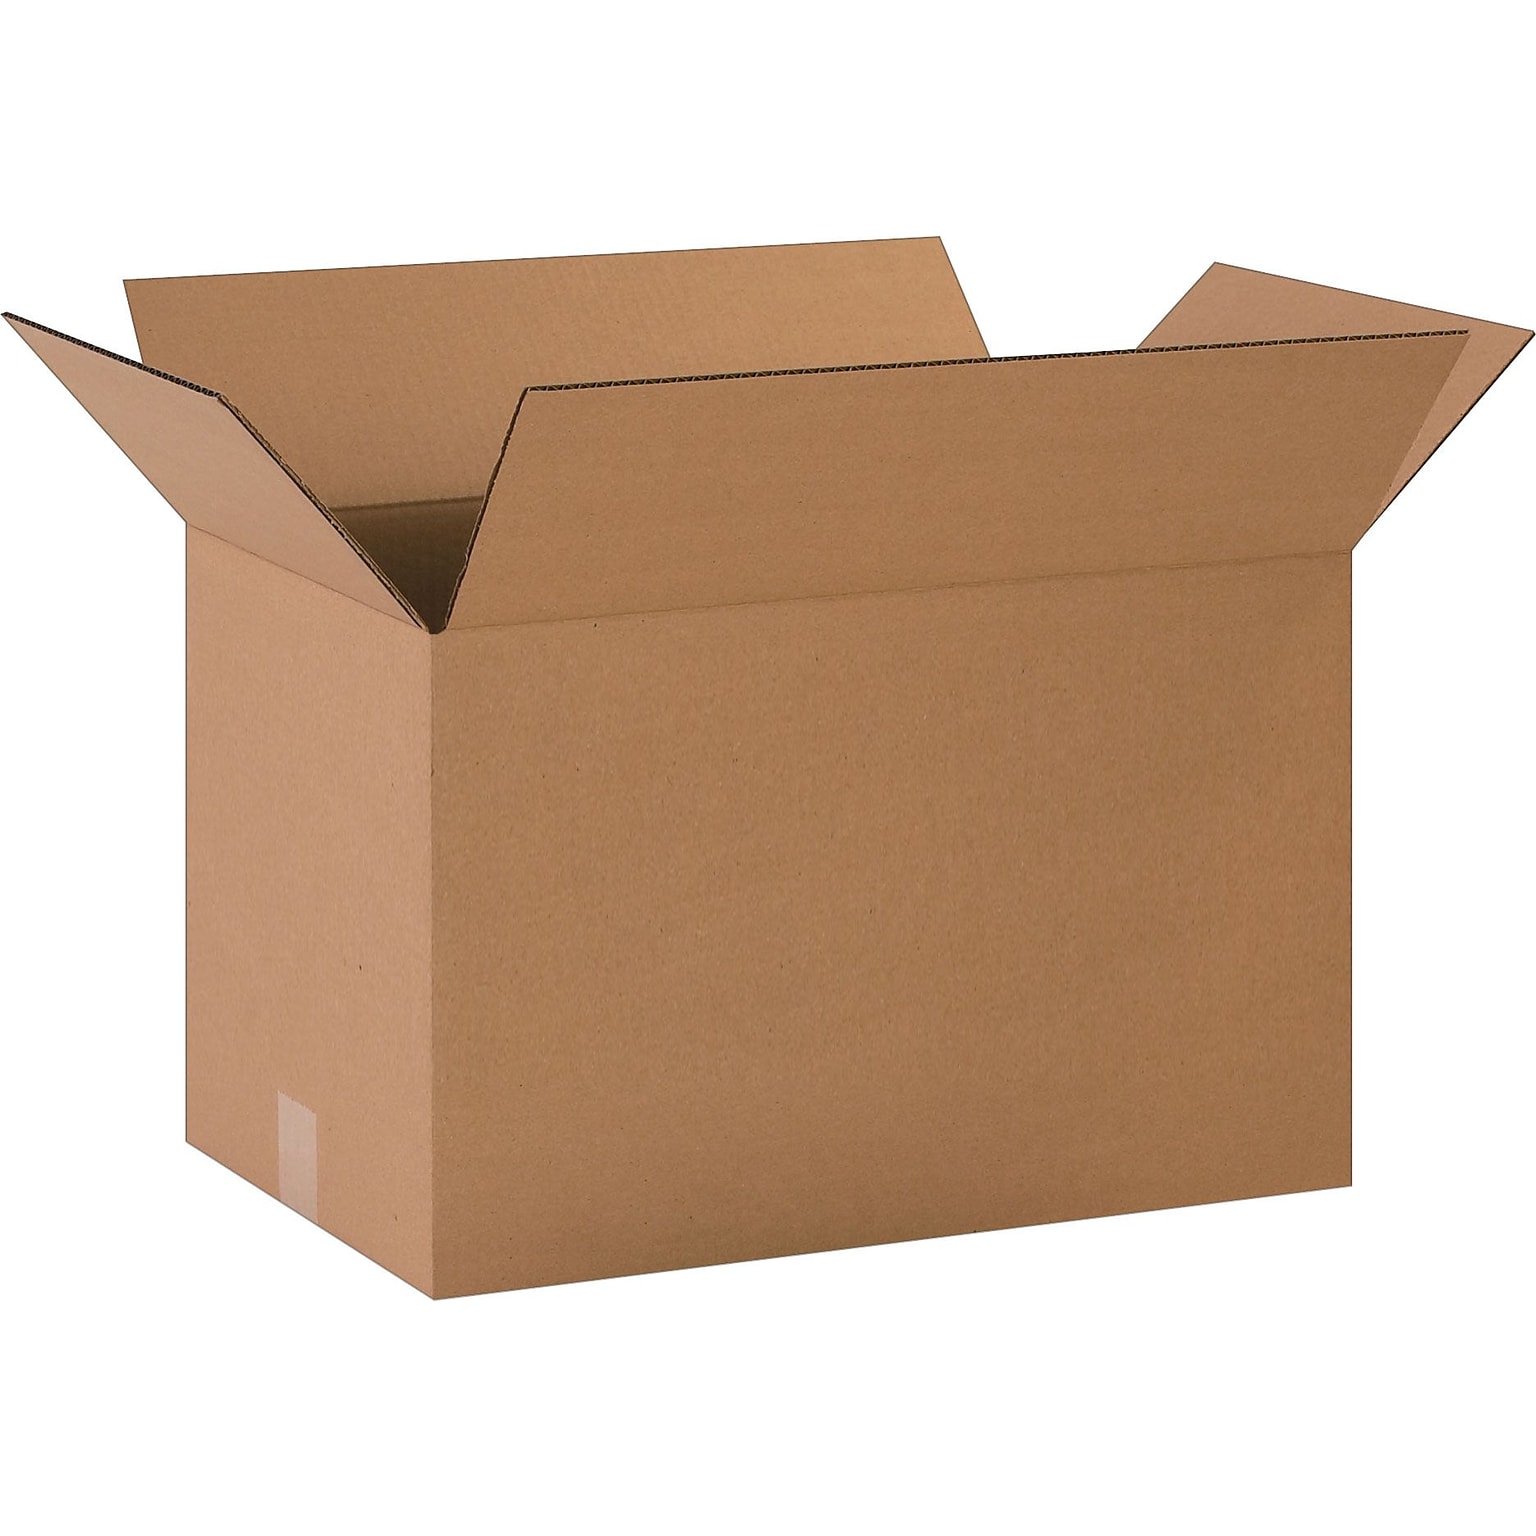 14 x 14 x 14 Heavy Duty Double Wall Shipping Boxes, 48 ECT, Kraft, 15/Pack (BS141414HDDW)